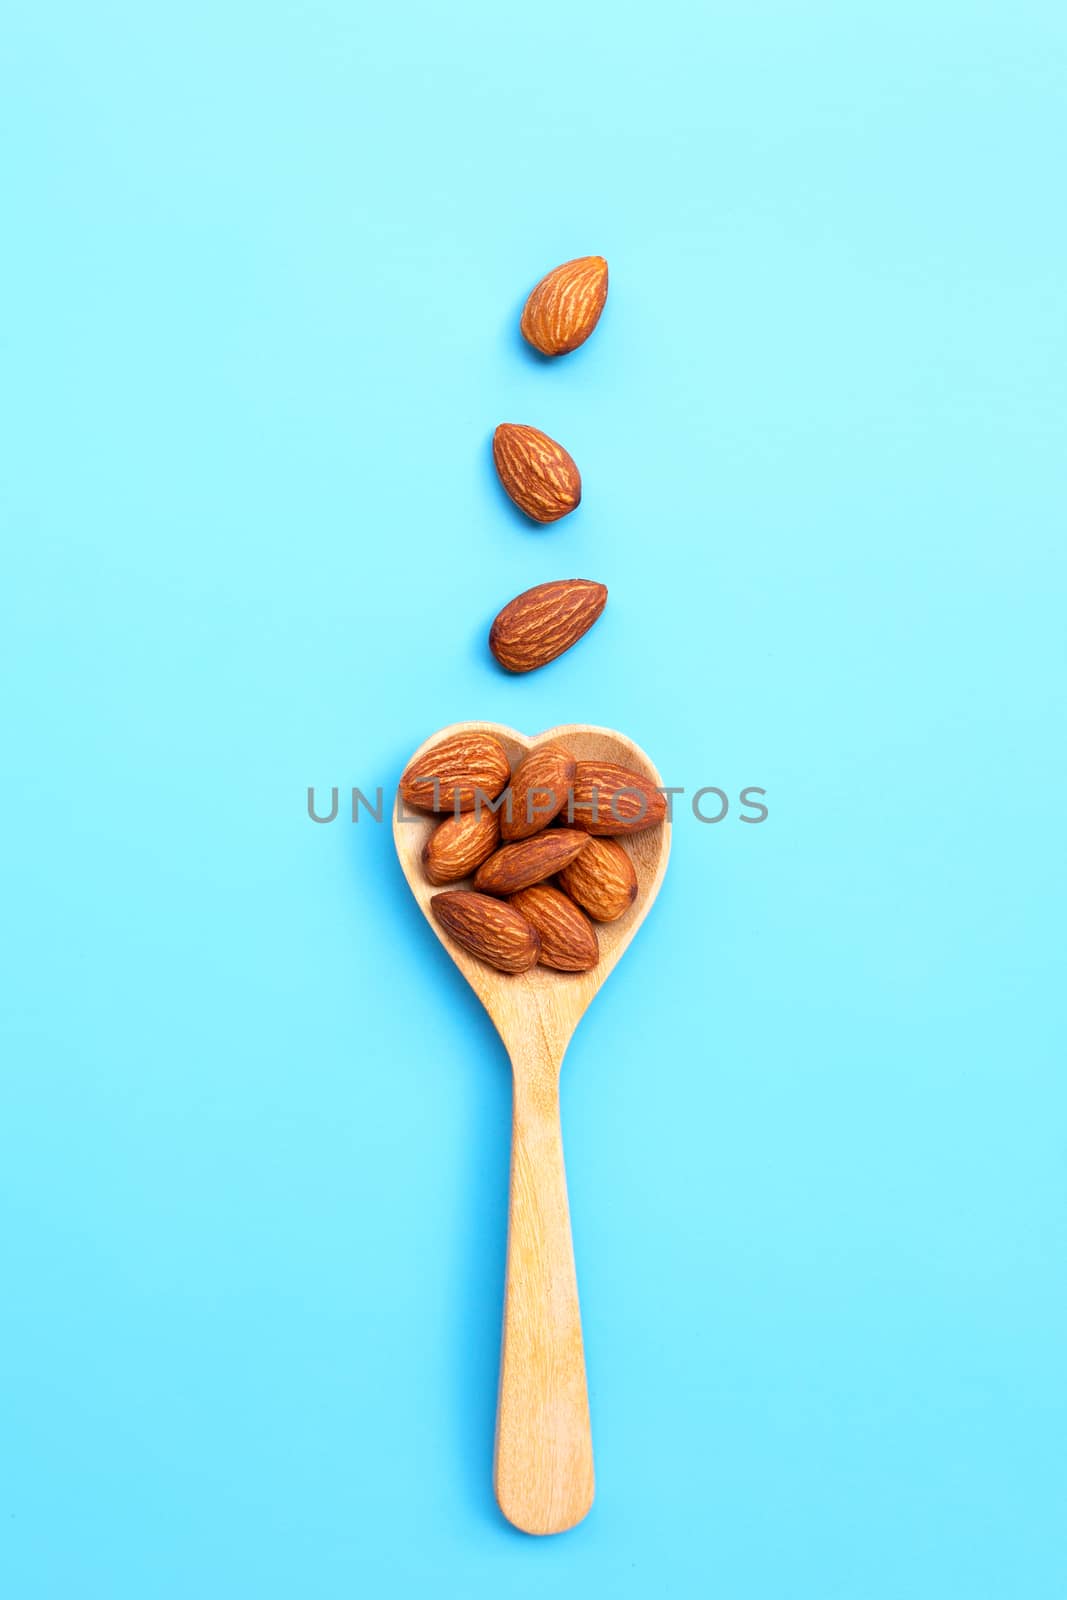 Almonds on heart shape wooden spoon on blue background. Top view